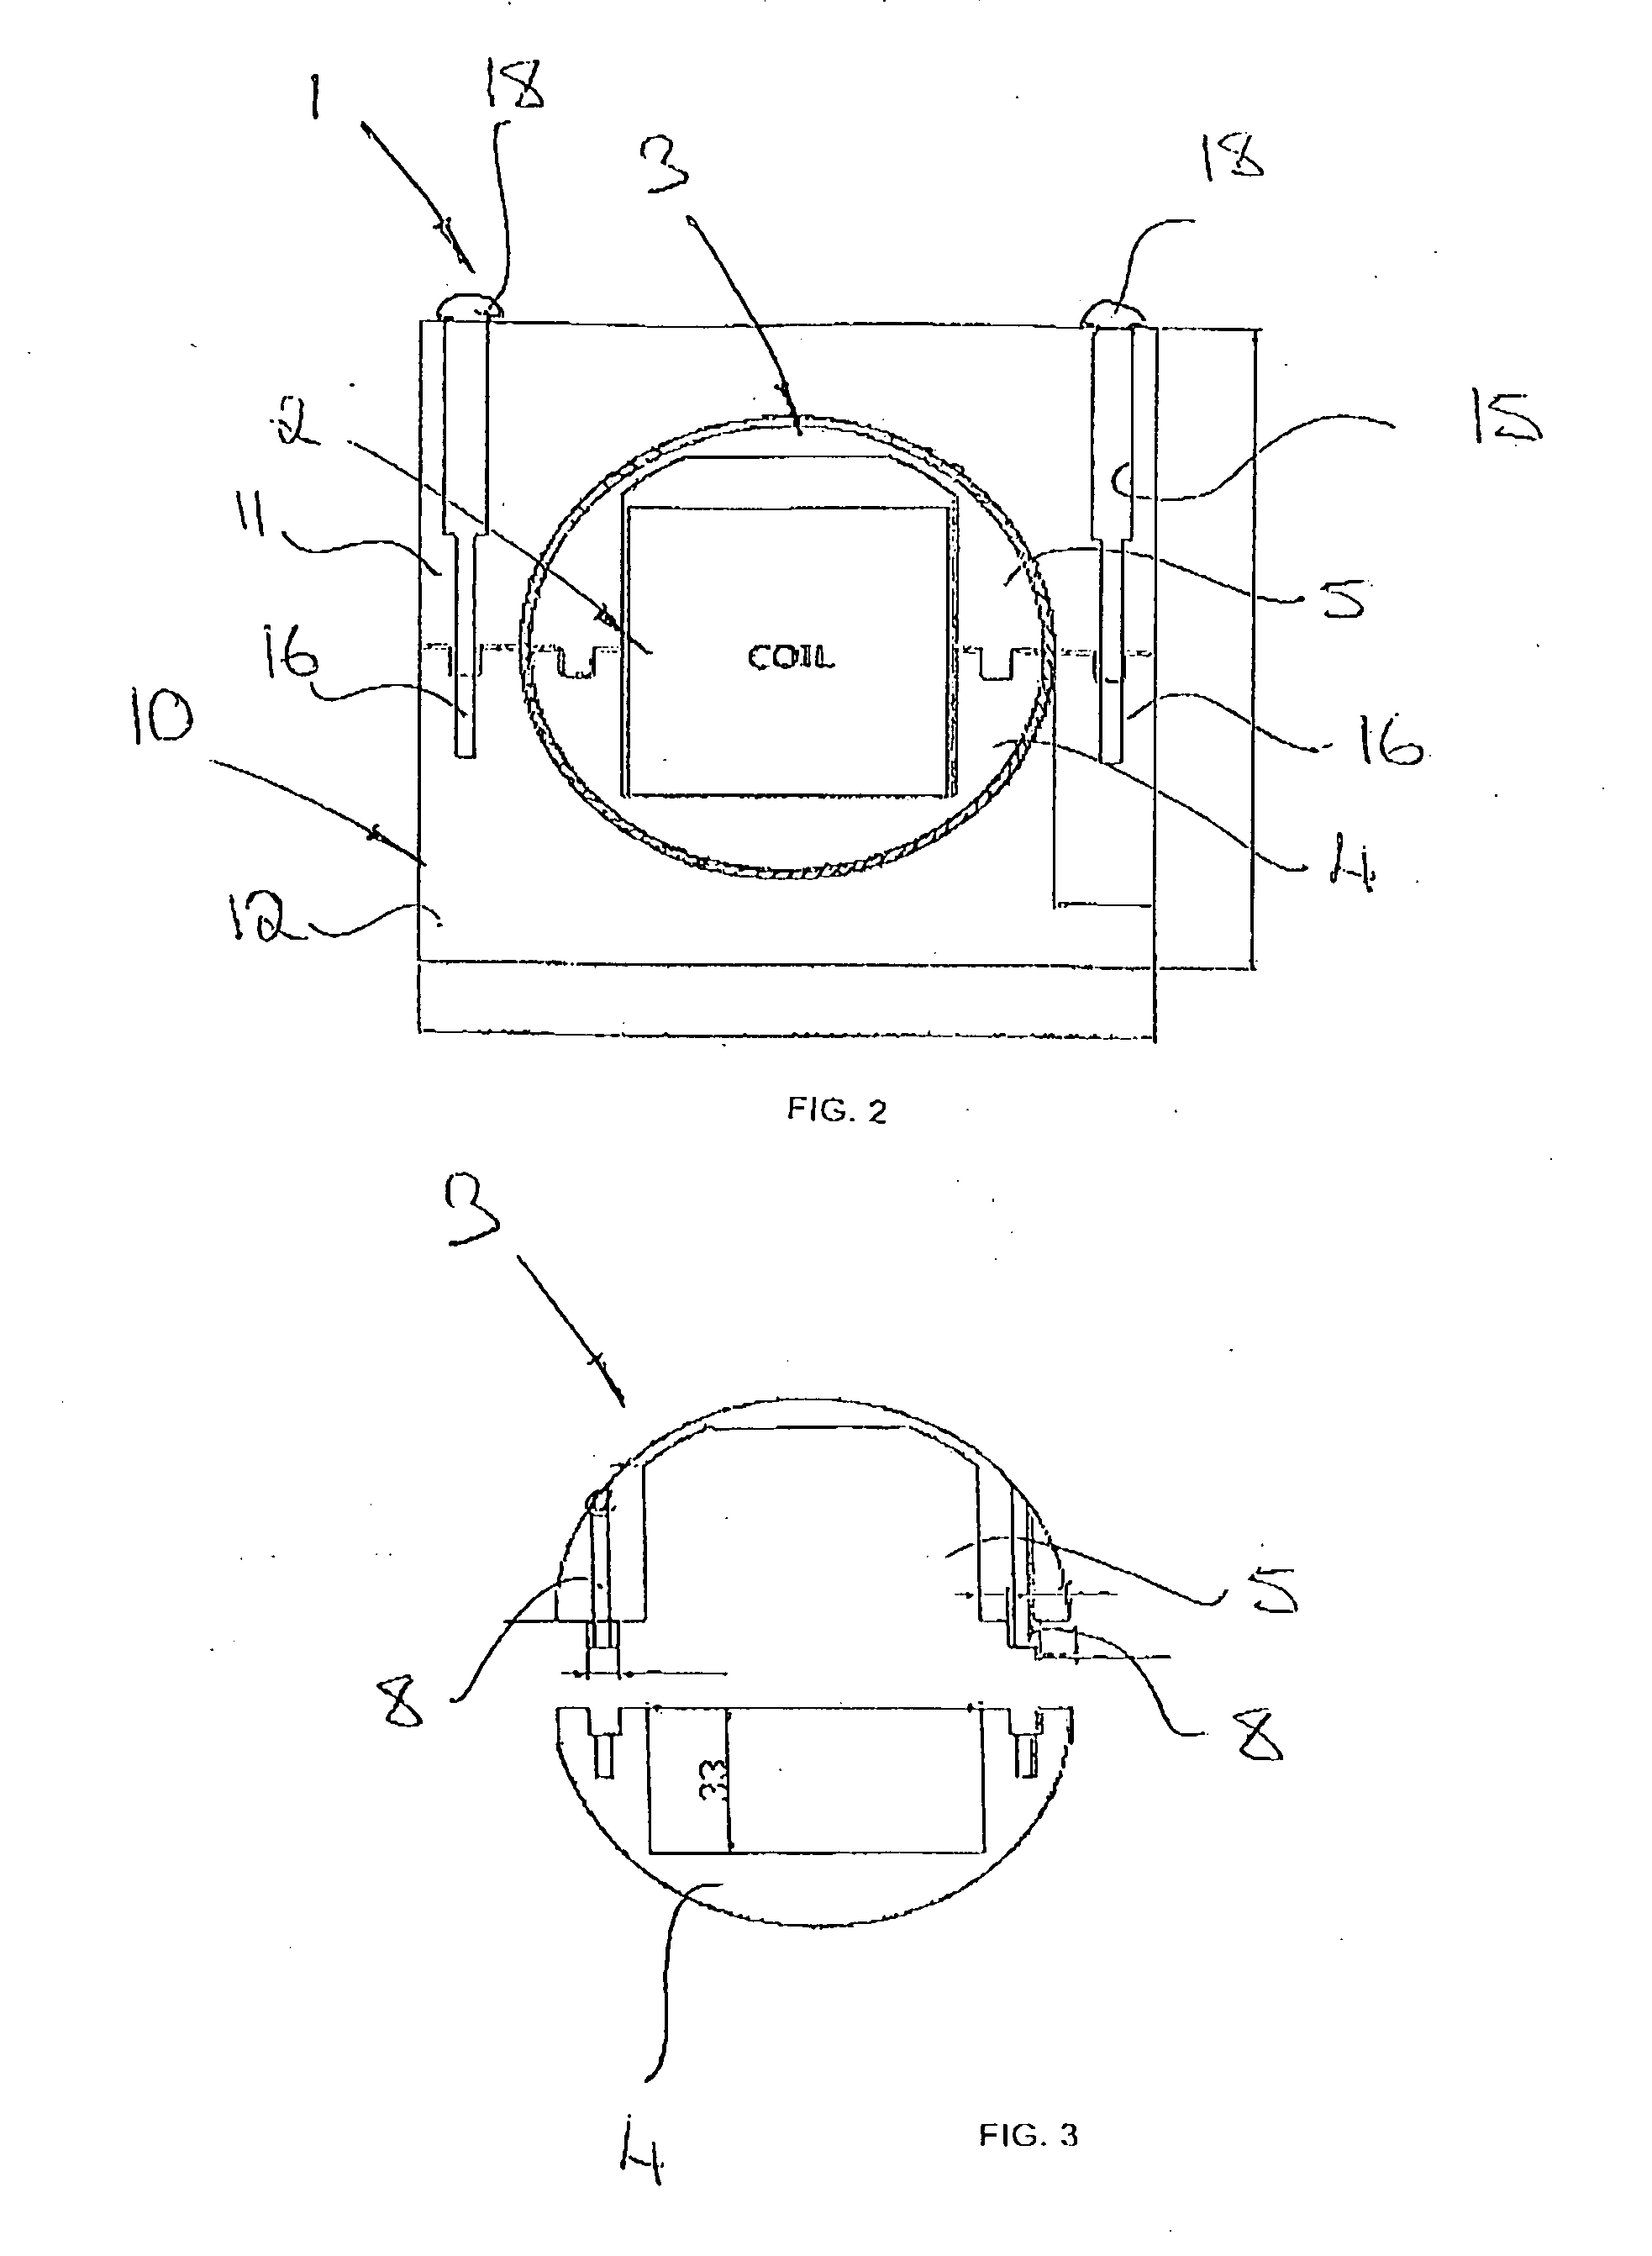 Blast movement monitor and method for determining the movement of a blast movement monitor and associated rock as a result of blasting operations